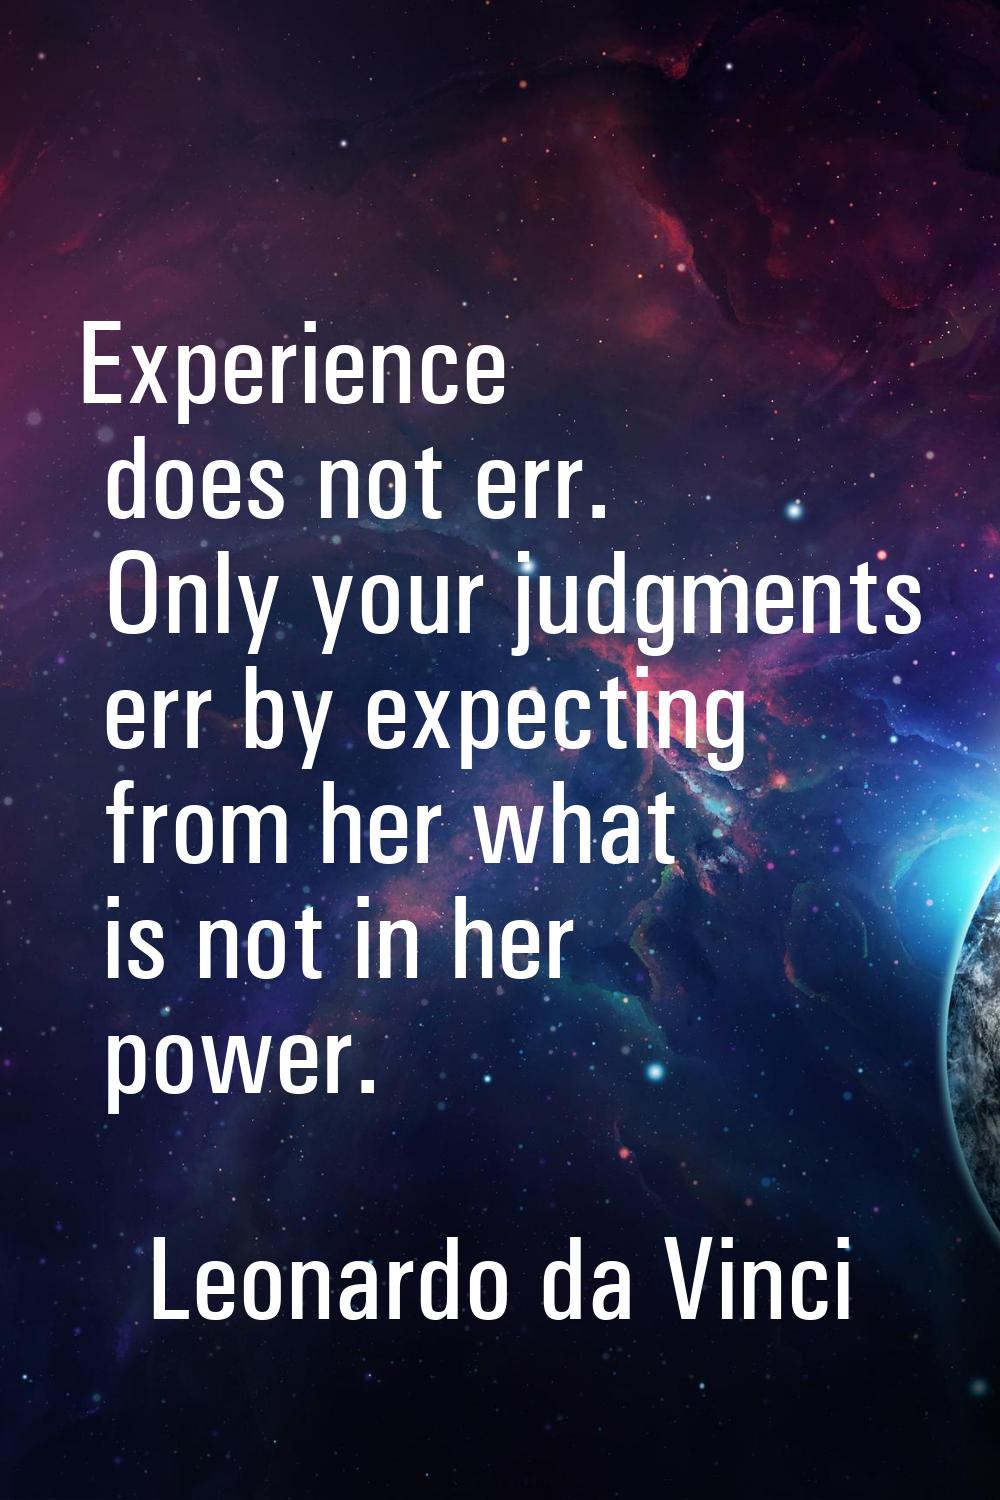 Experience does not err. Only your judgments err by expecting from her what is not in her power.